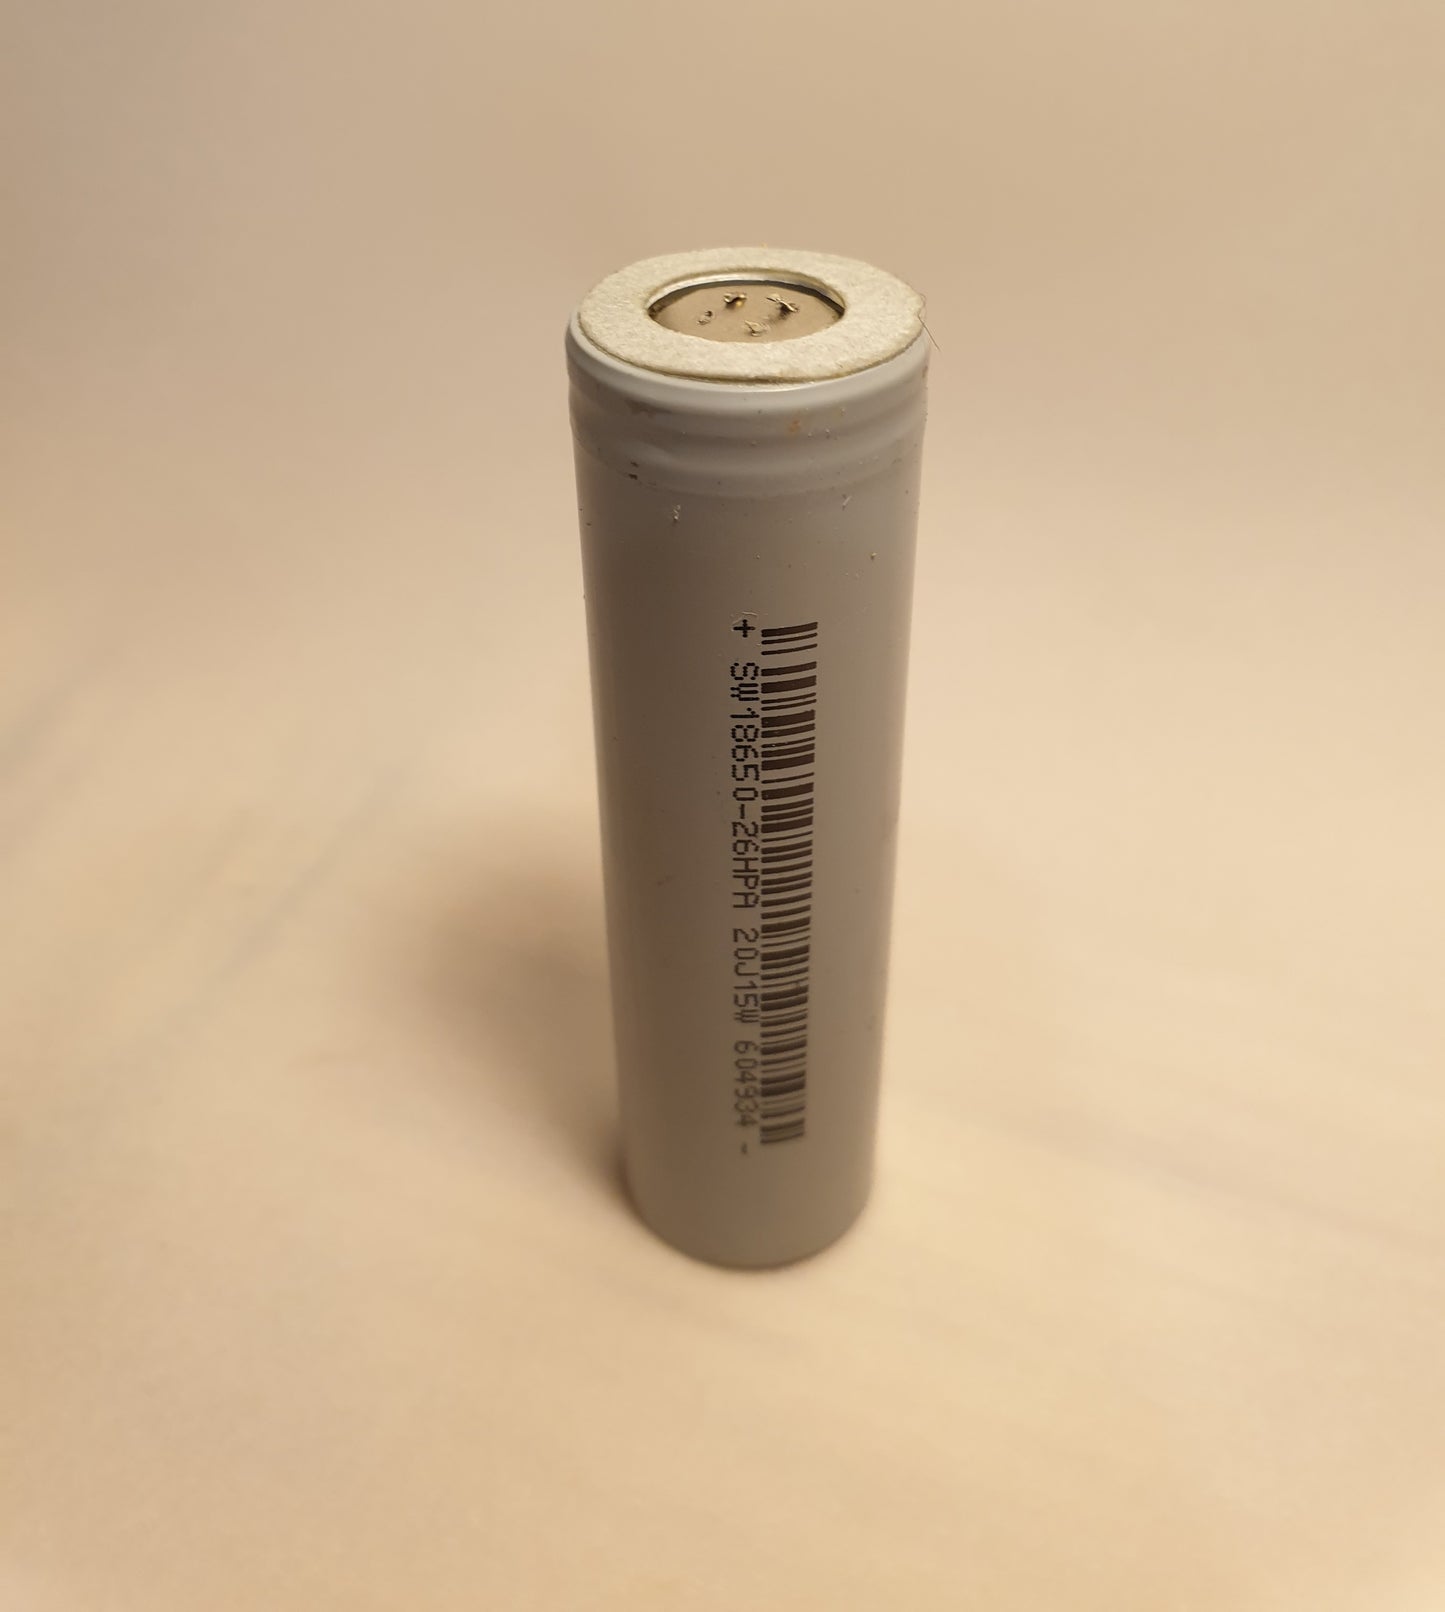 Free Shipping* : Reclaimed 18650 Lithium Ion Cell 2.6Ah